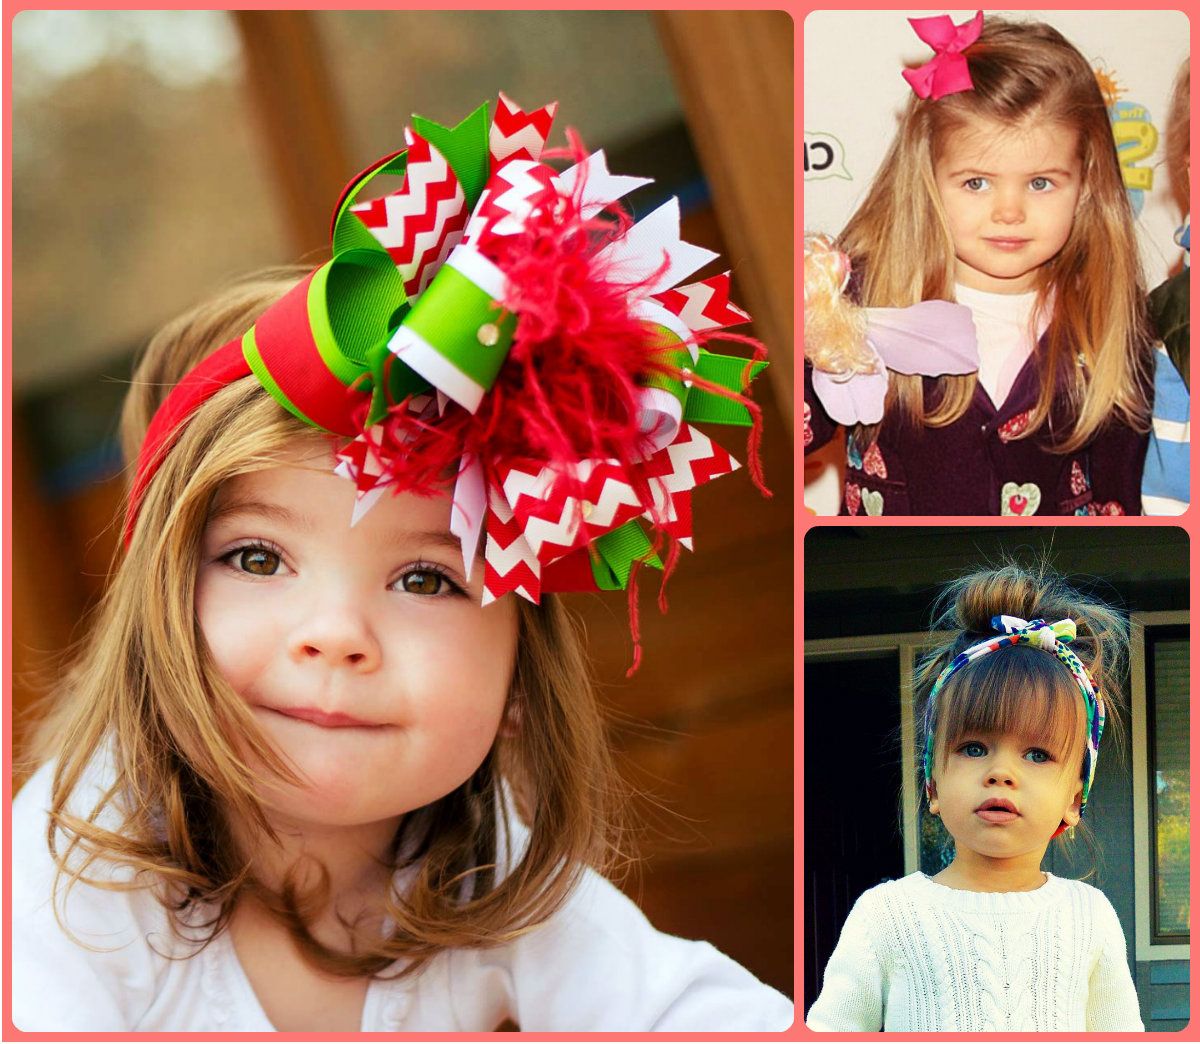 Cute Christmas Party Hairstyles For Kids | Hairstyles 2017, Hair Regarding Short Hairstyles For Christmas Party (View 3 of 25)